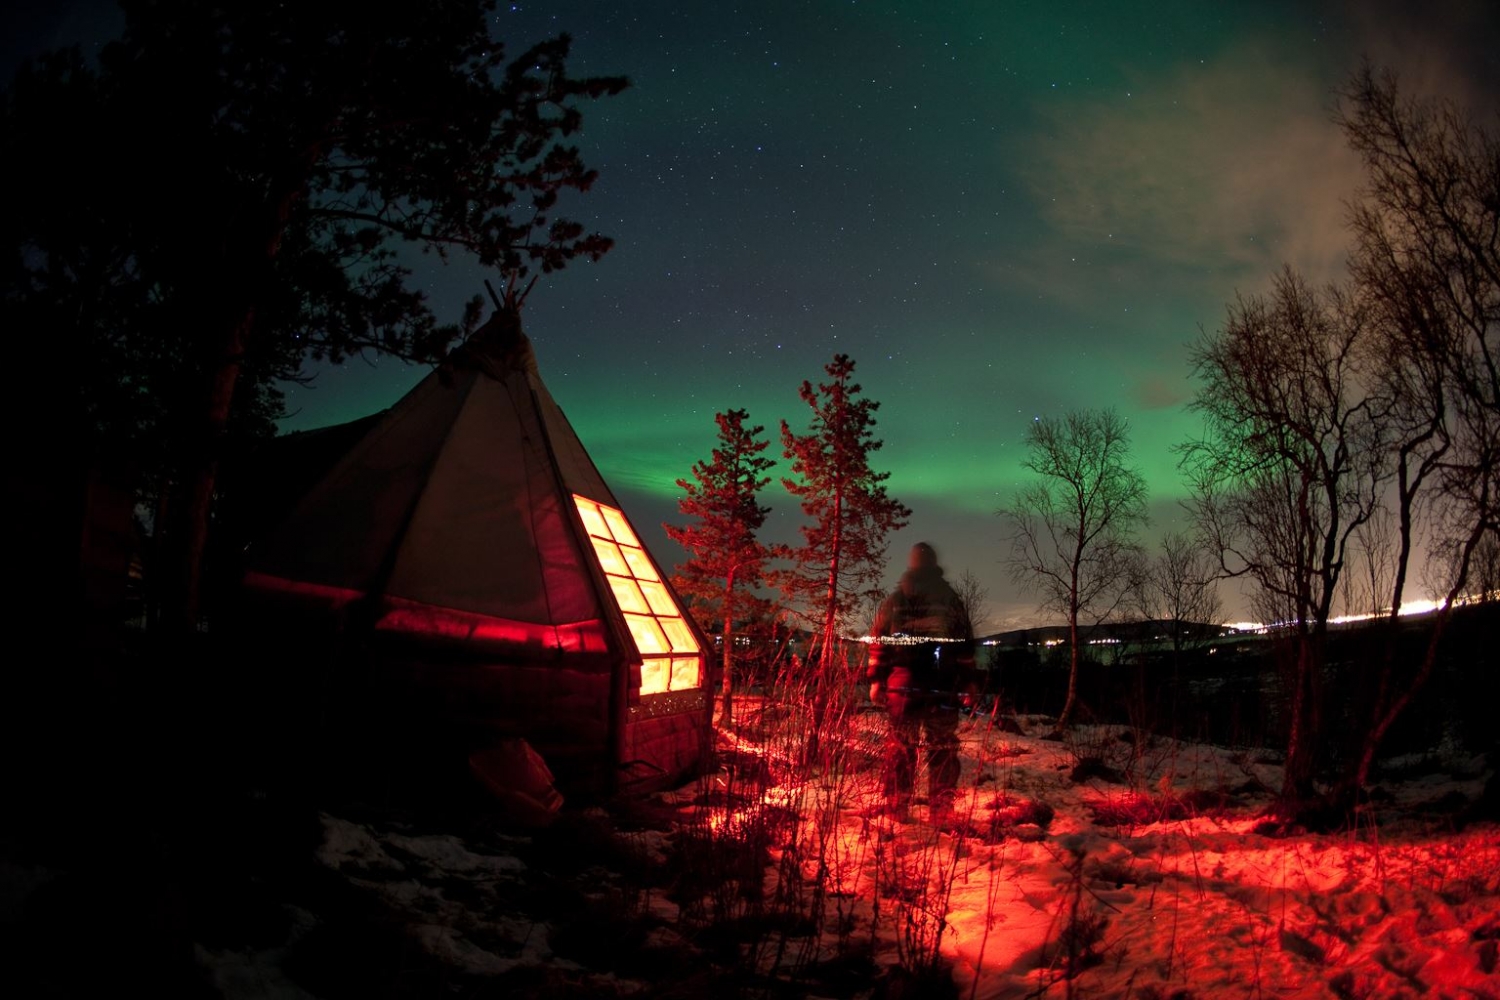 guest outside one of the huts enjoying the northern lights in the sky